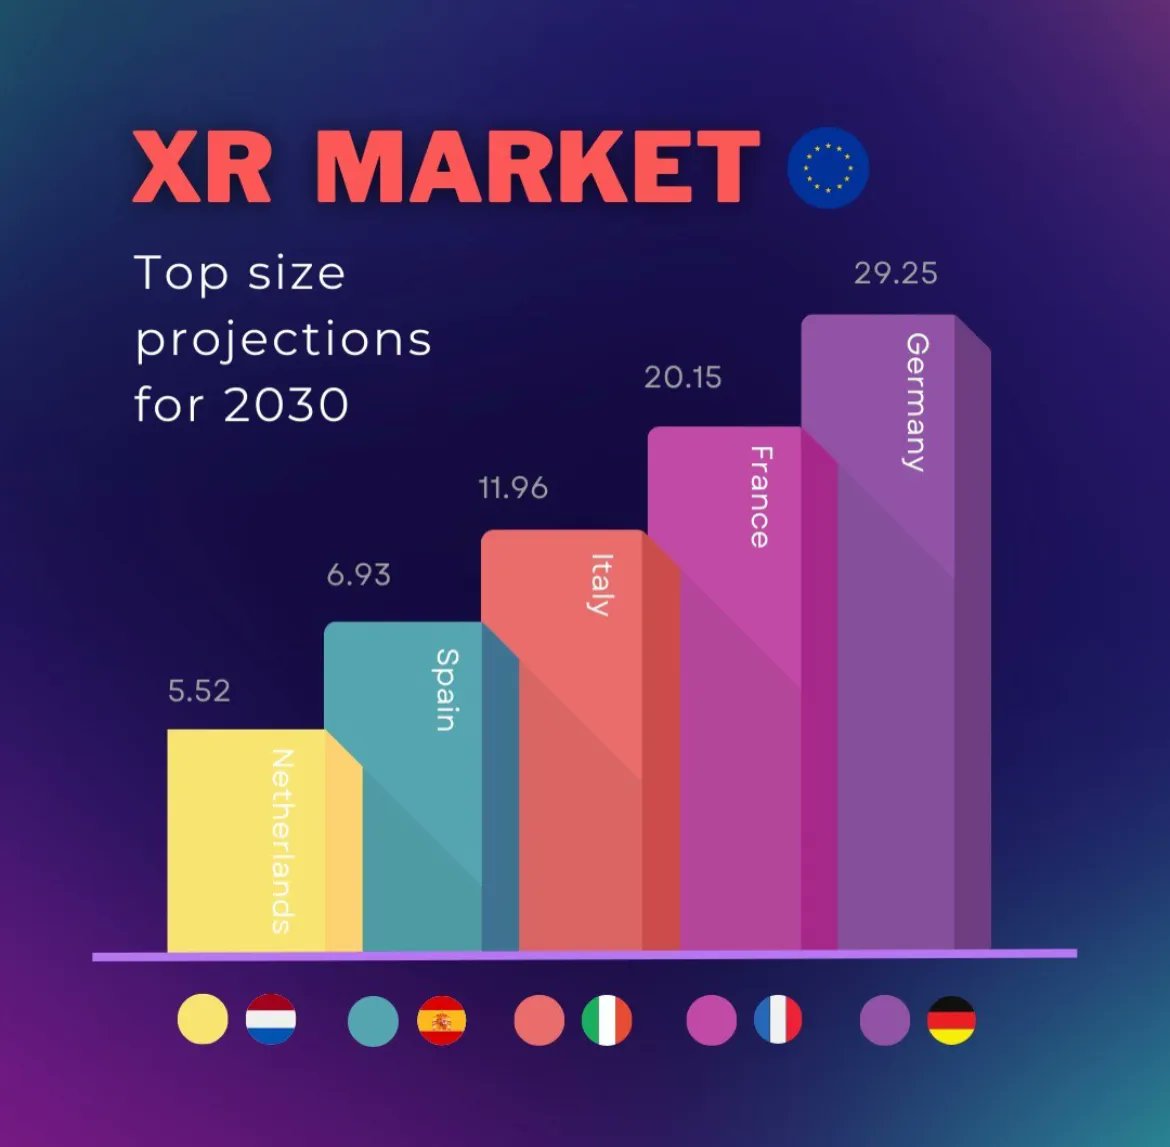 The European Commission's report on the extended reality revealed in which European countries will see the greatest market growth. Here are the top 10 predictions for 2030. 

Read more > bit.ly/41w4wte @DigitalEU v @antgrasso #DigitalEUAmbassador #ExtendedReality